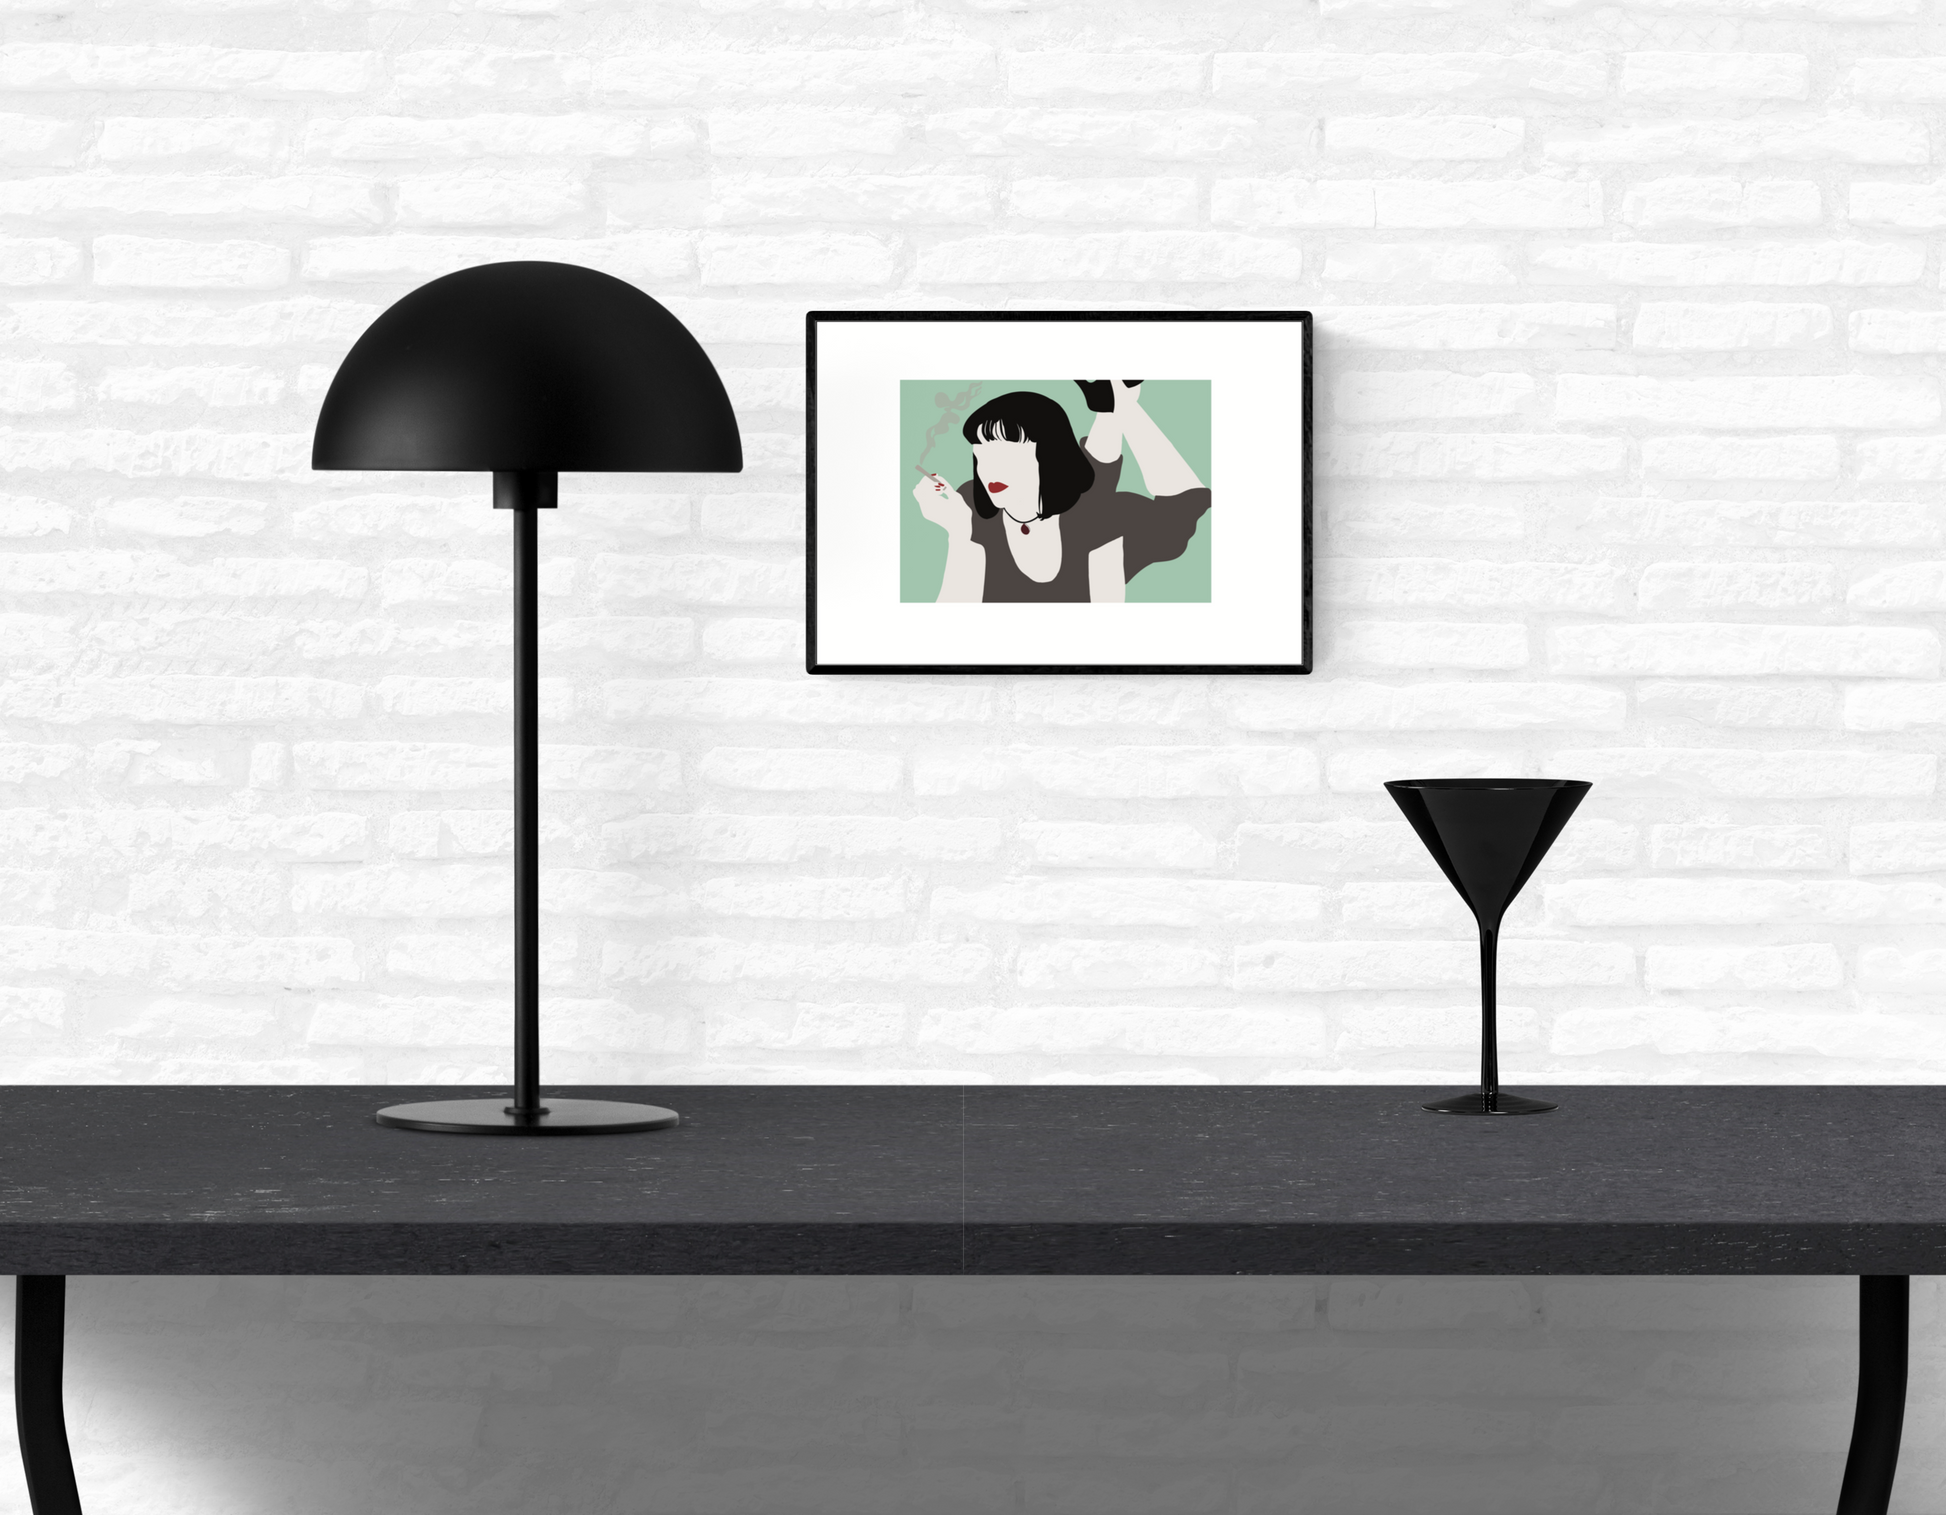 Wall art illustration print of Mia Wallace from Quentin Tarantino’s classic movie Pulp Fiction framed and mounted on a home’s interior white brick wall